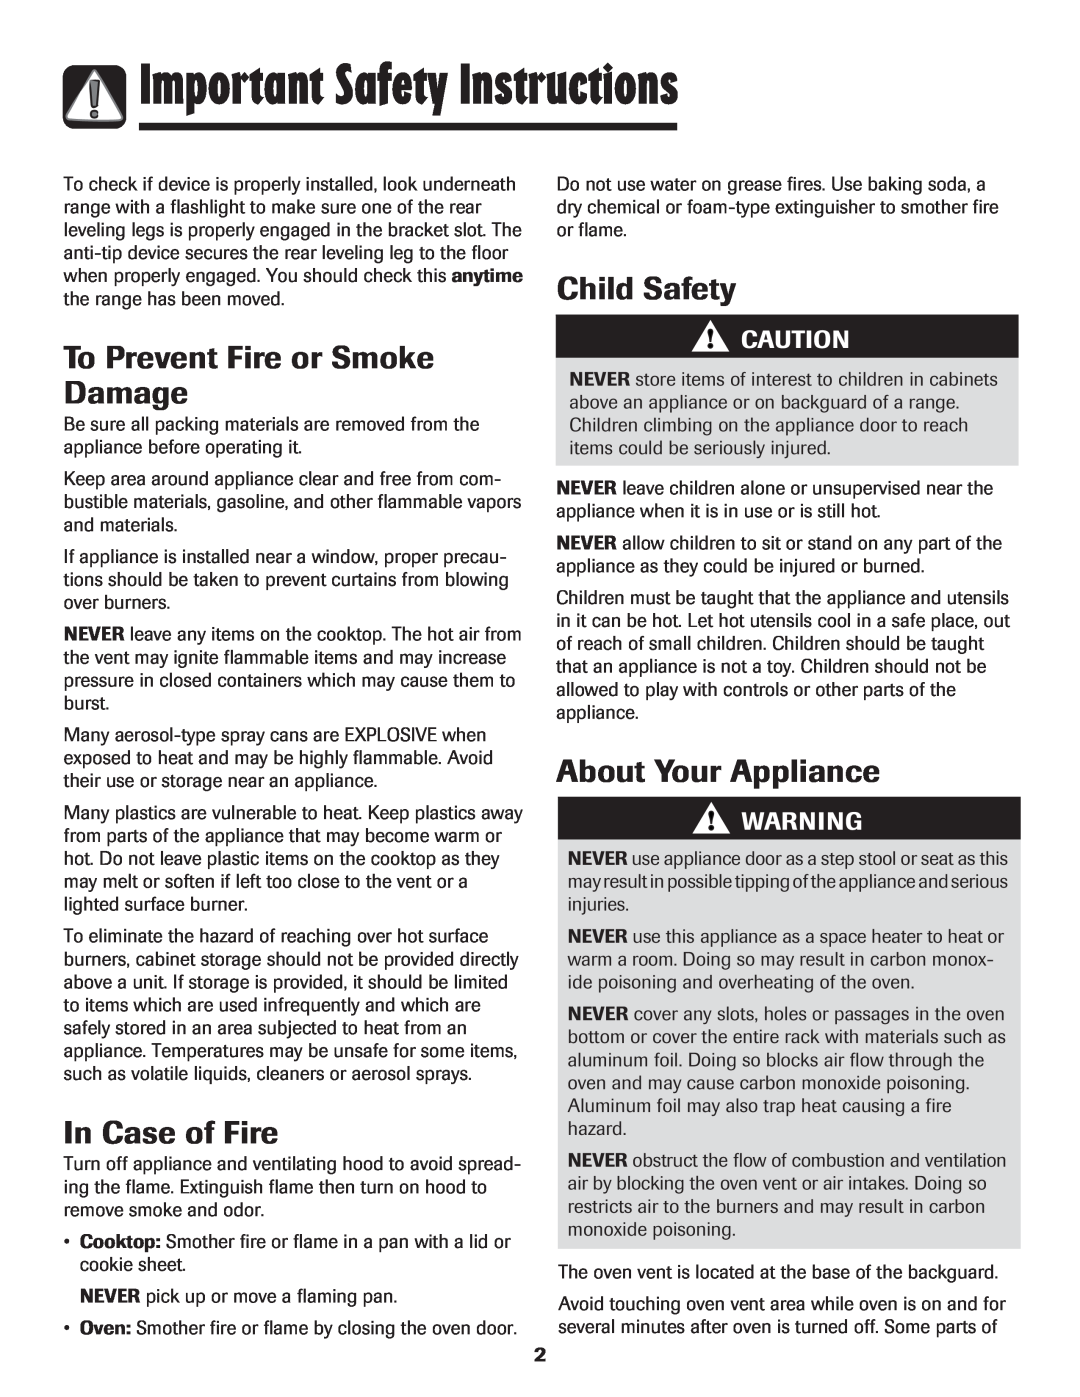 Maytag MGR5775QDW manual Important Safety Instructions, To Prevent Fire or Smoke Damage, In Case of Fire, Child Safety 